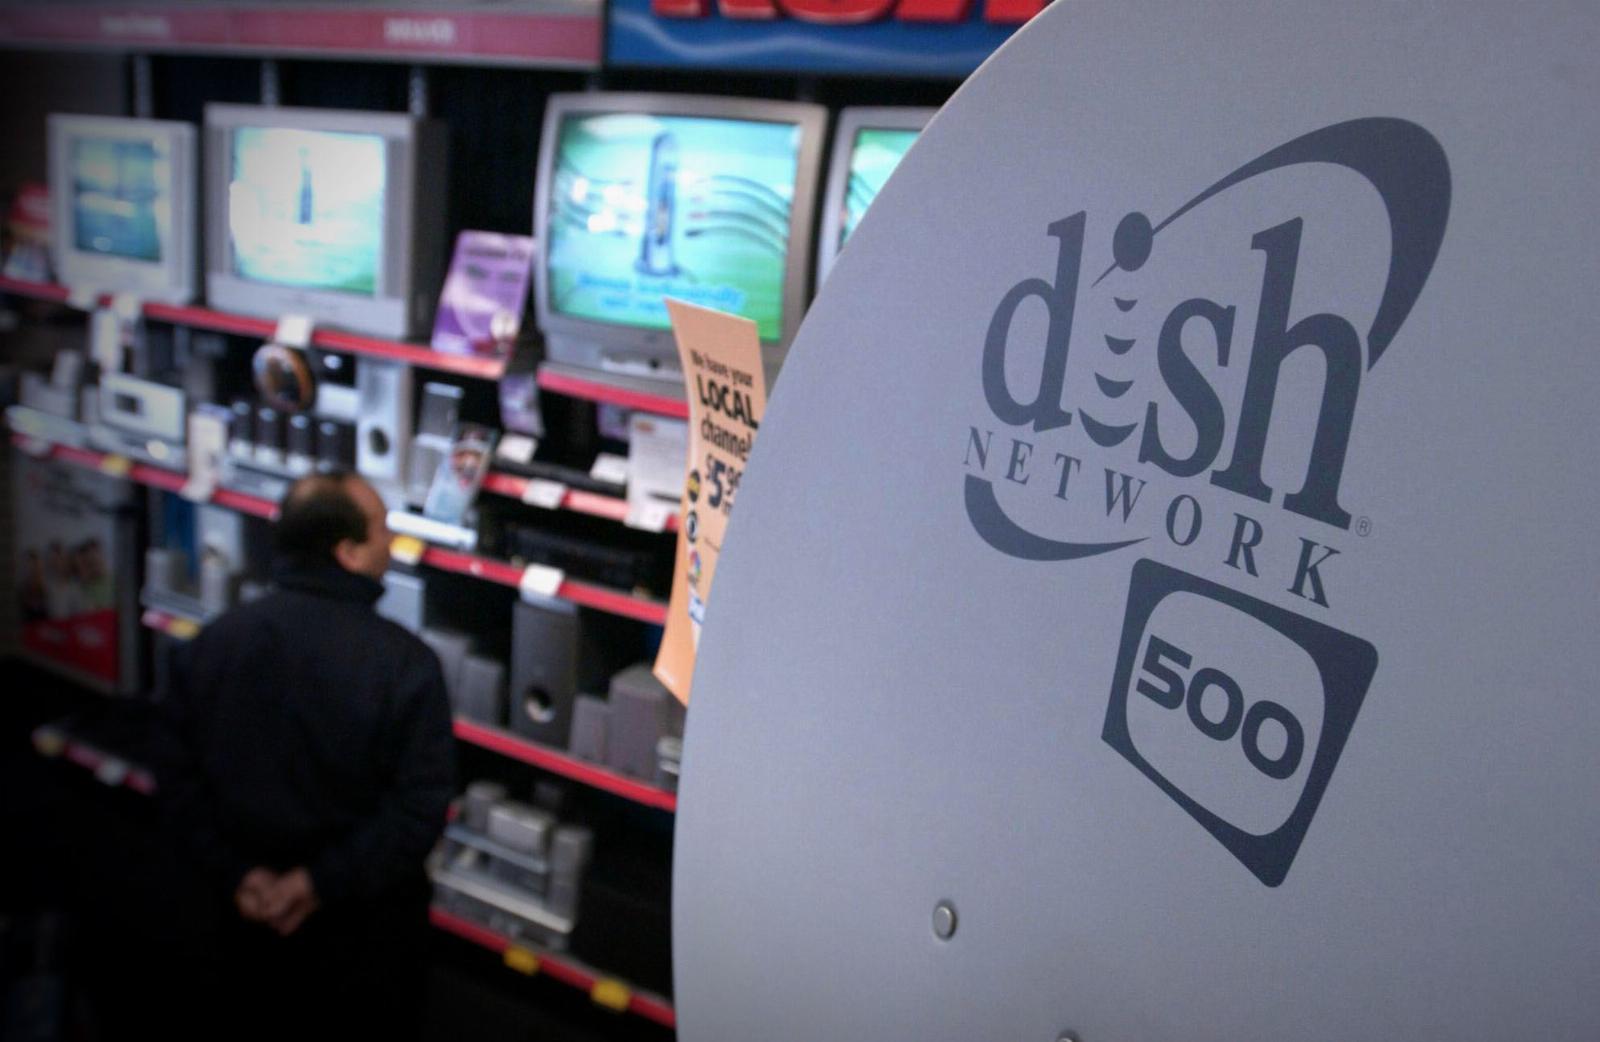 Dish says ransomware gang stole almost 300,000 employee records